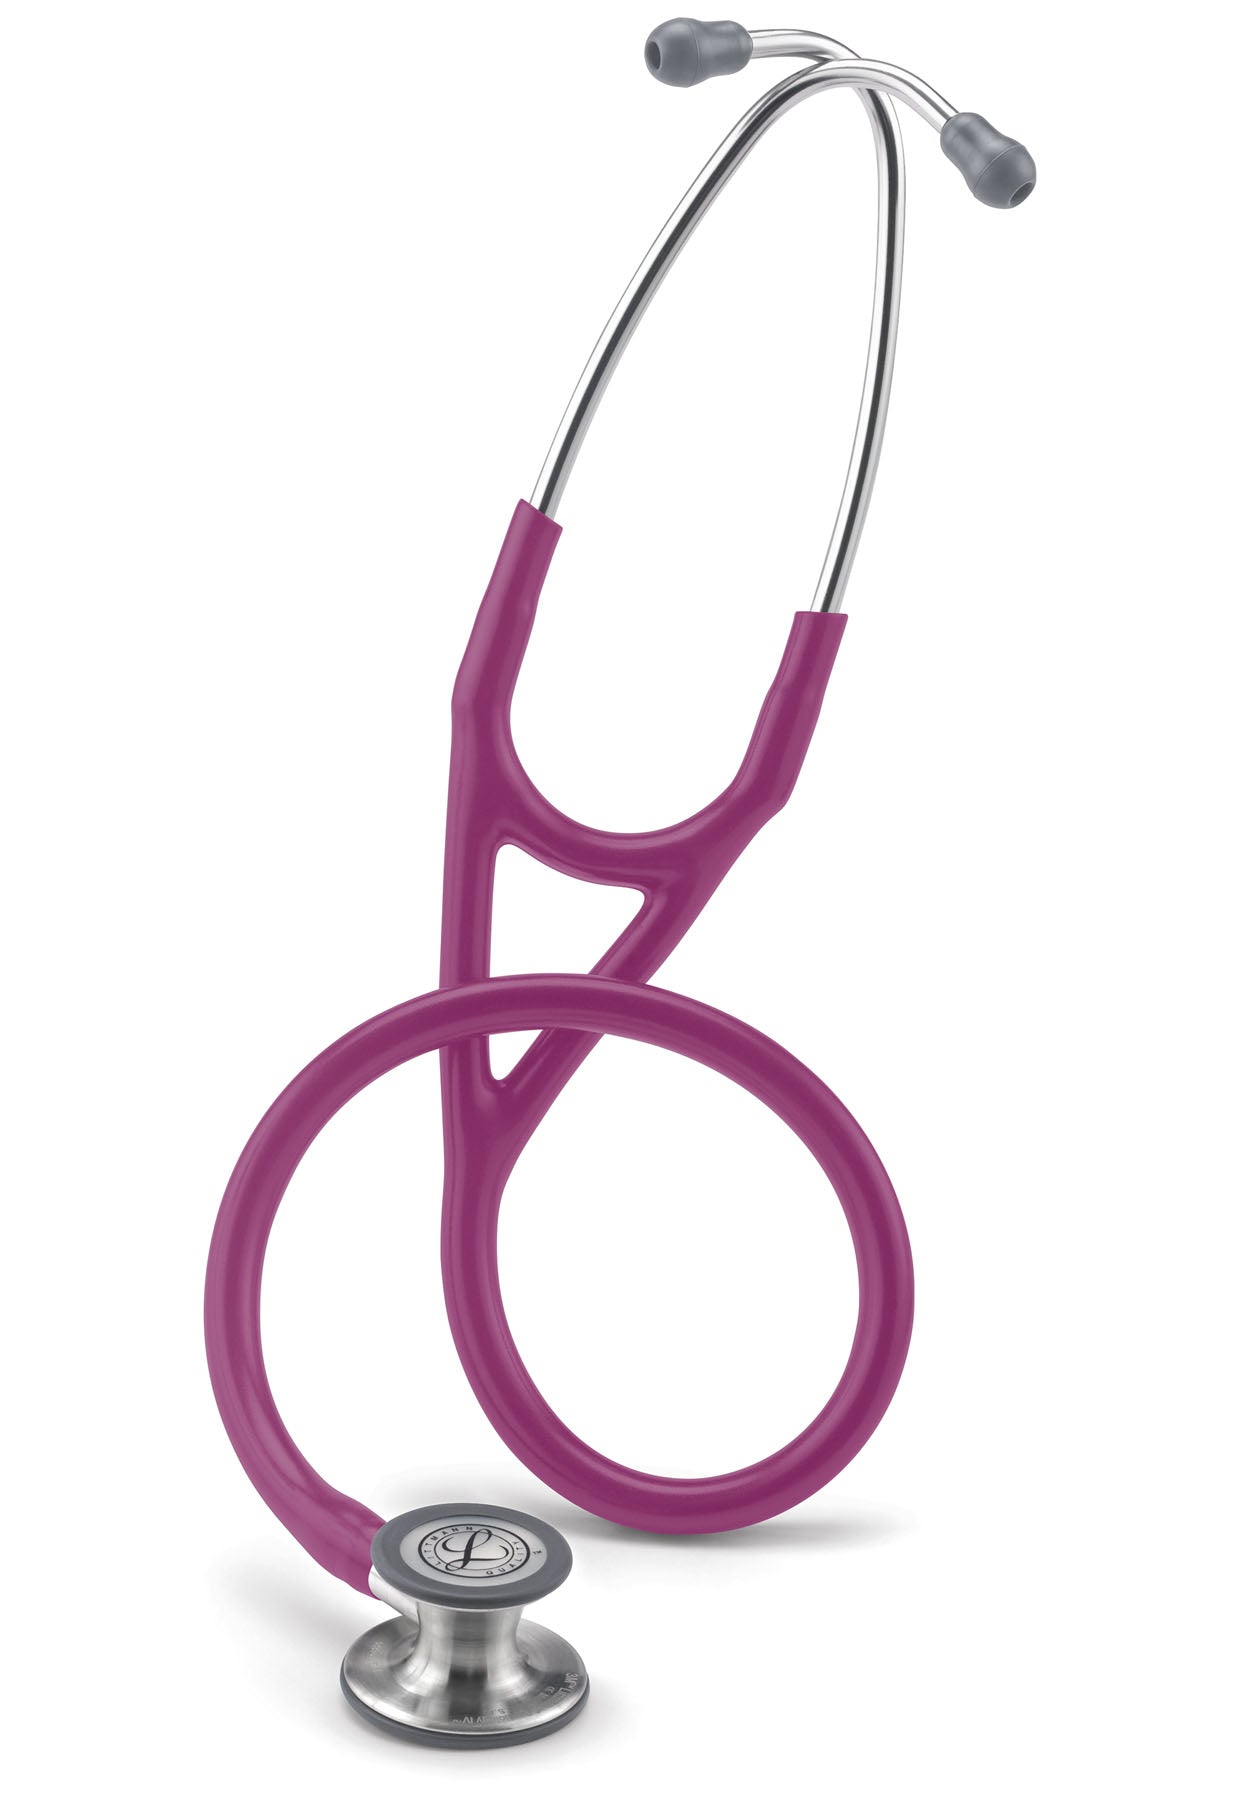 Littmann Cardiology IV Diagnostic Stethoscopes with Standard Finish (6 colors)